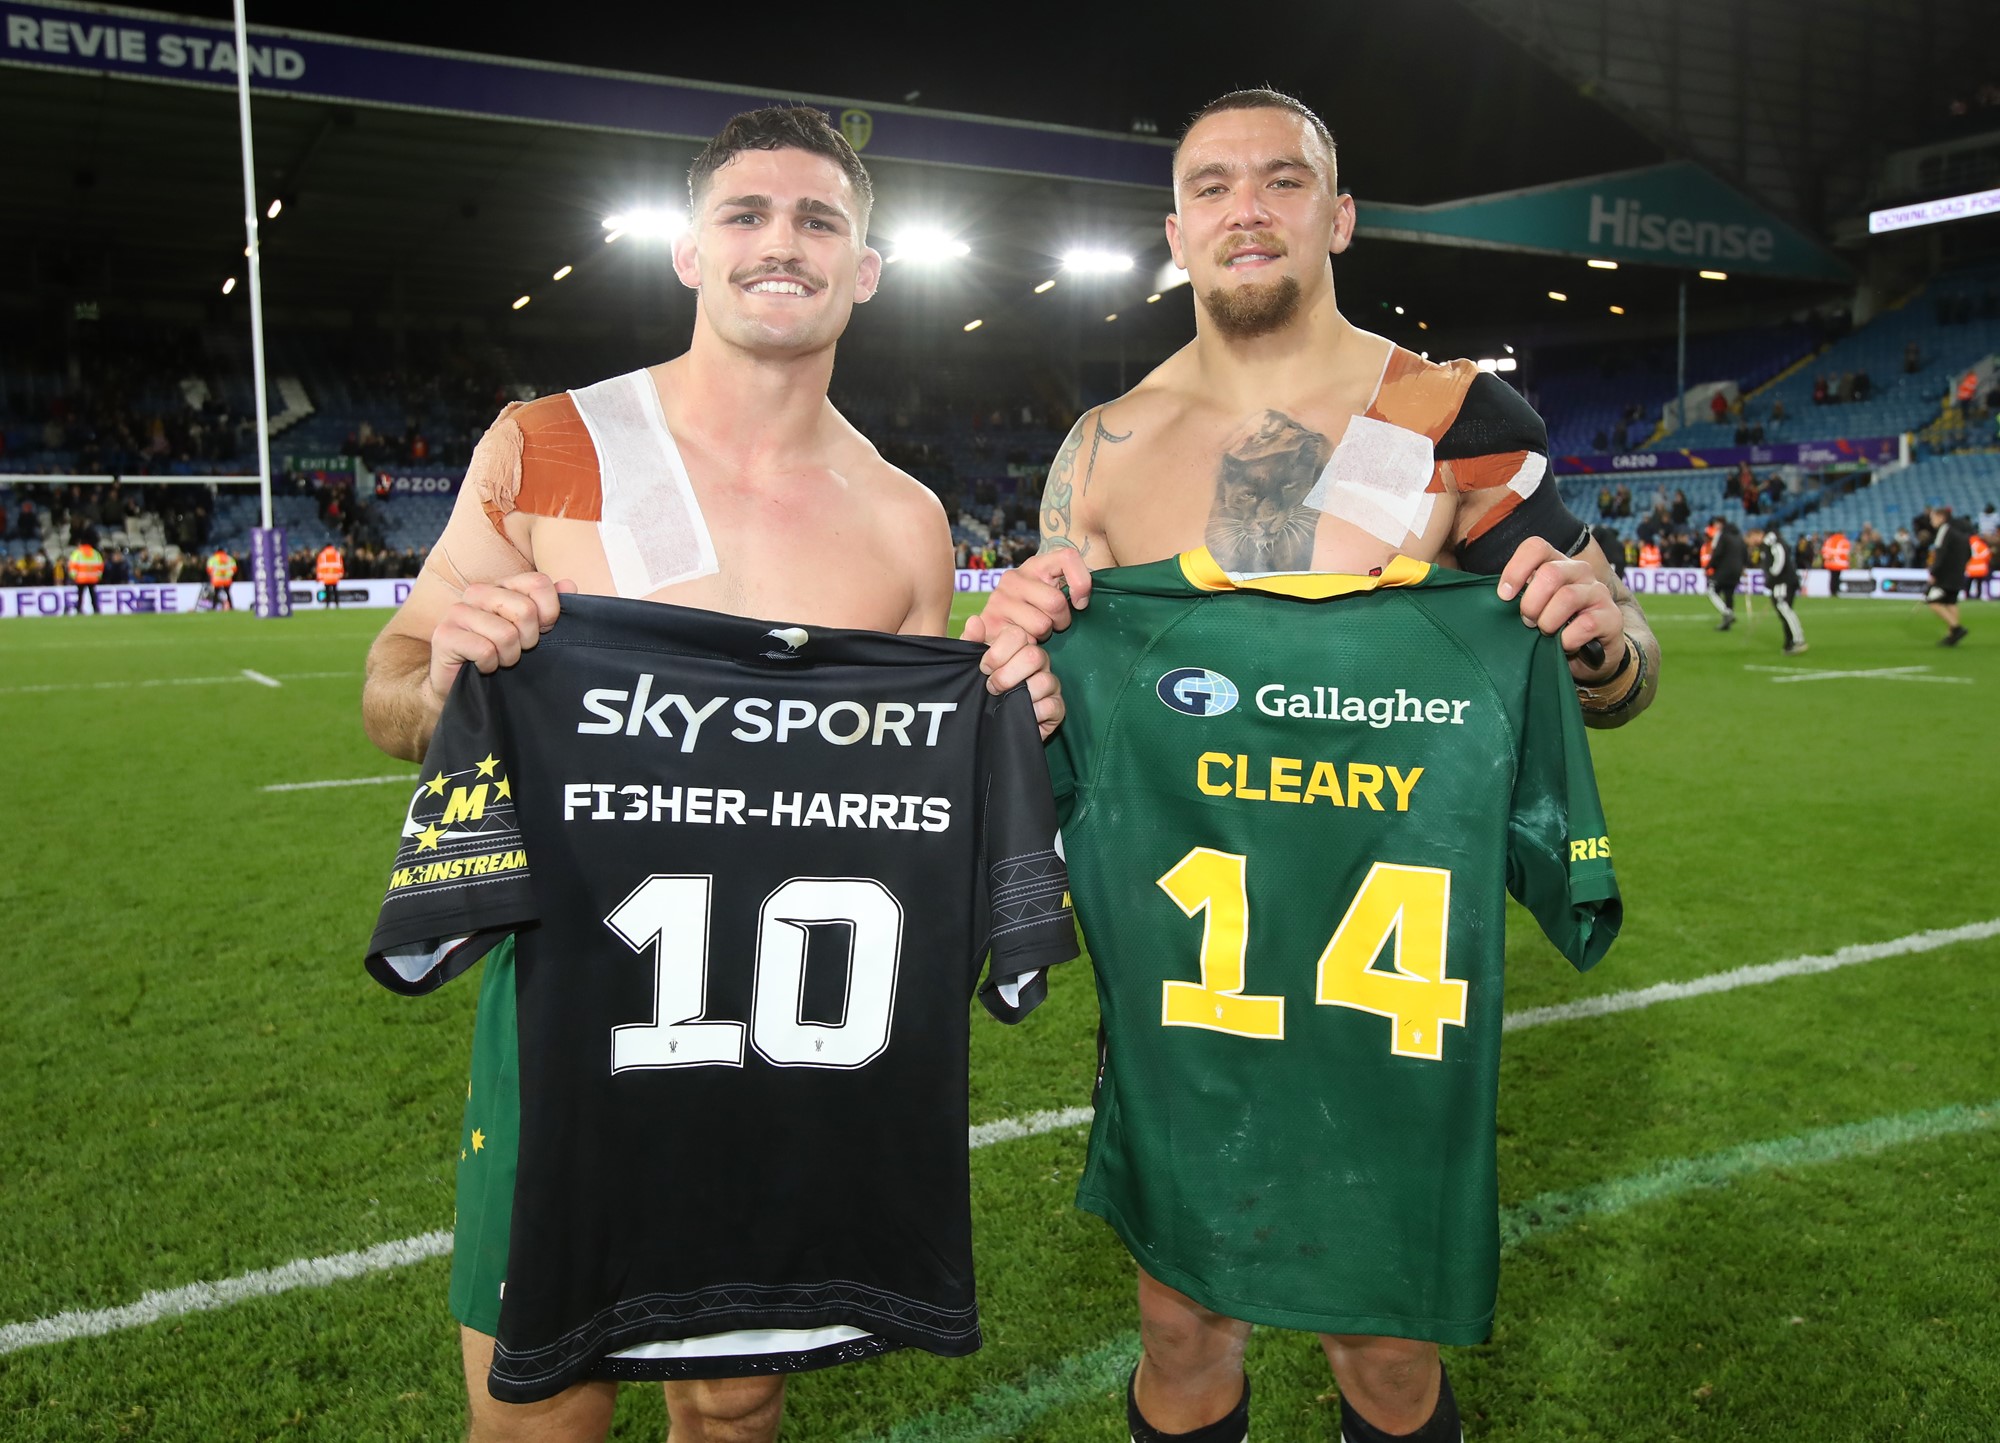 Nathan Cleary and James Fisher-Harris hold one another's jerseys after their Rugby League World Cup semifinal.